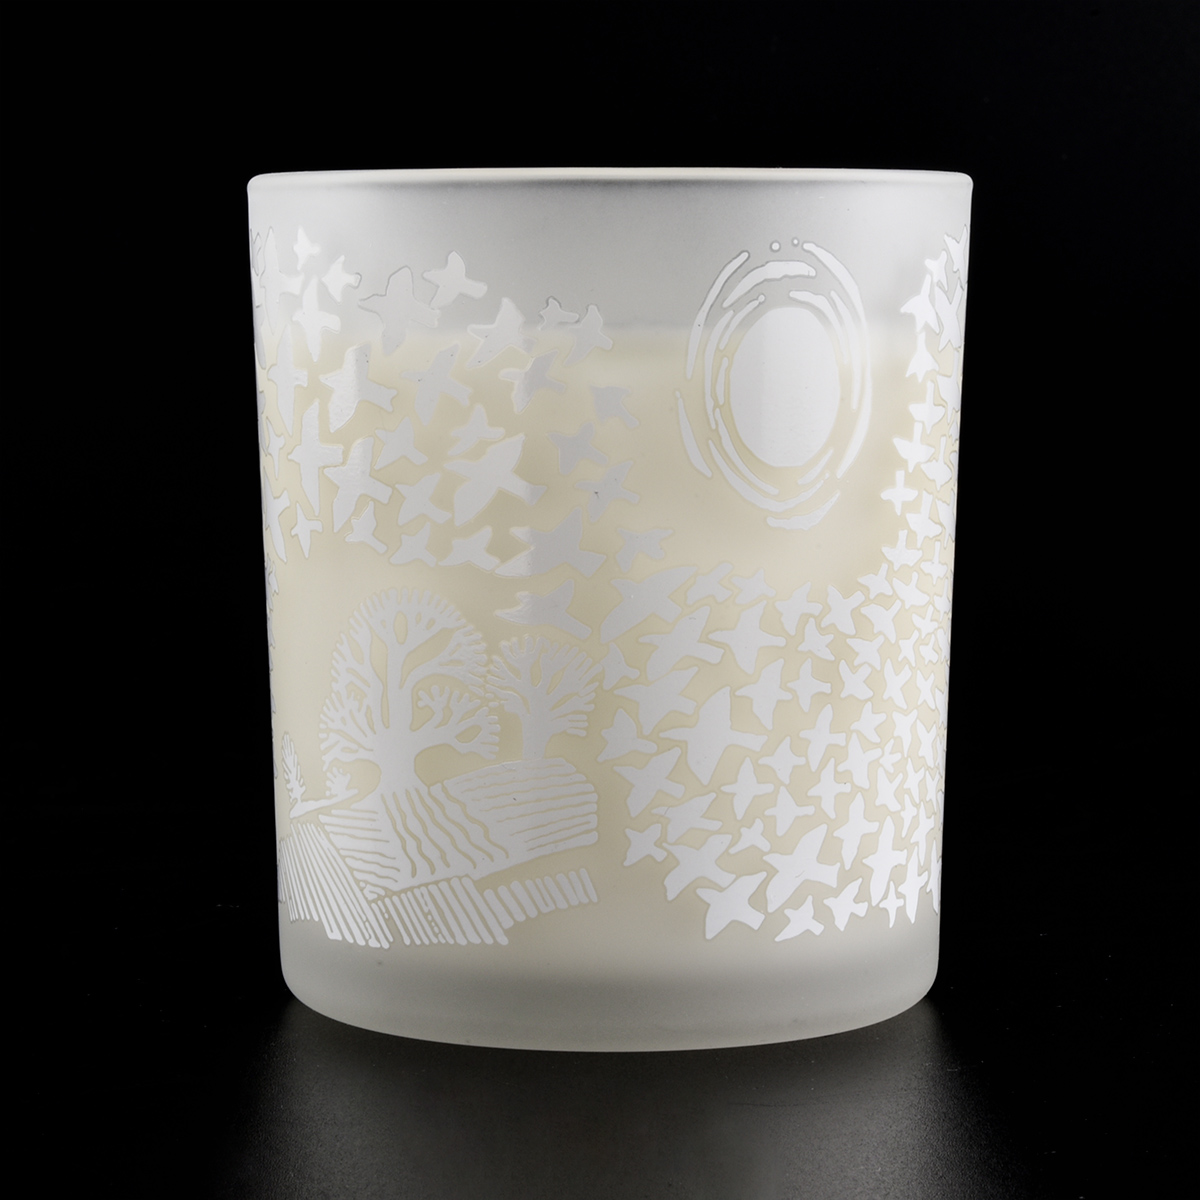 12 oz frosted glass candle holder with decal print